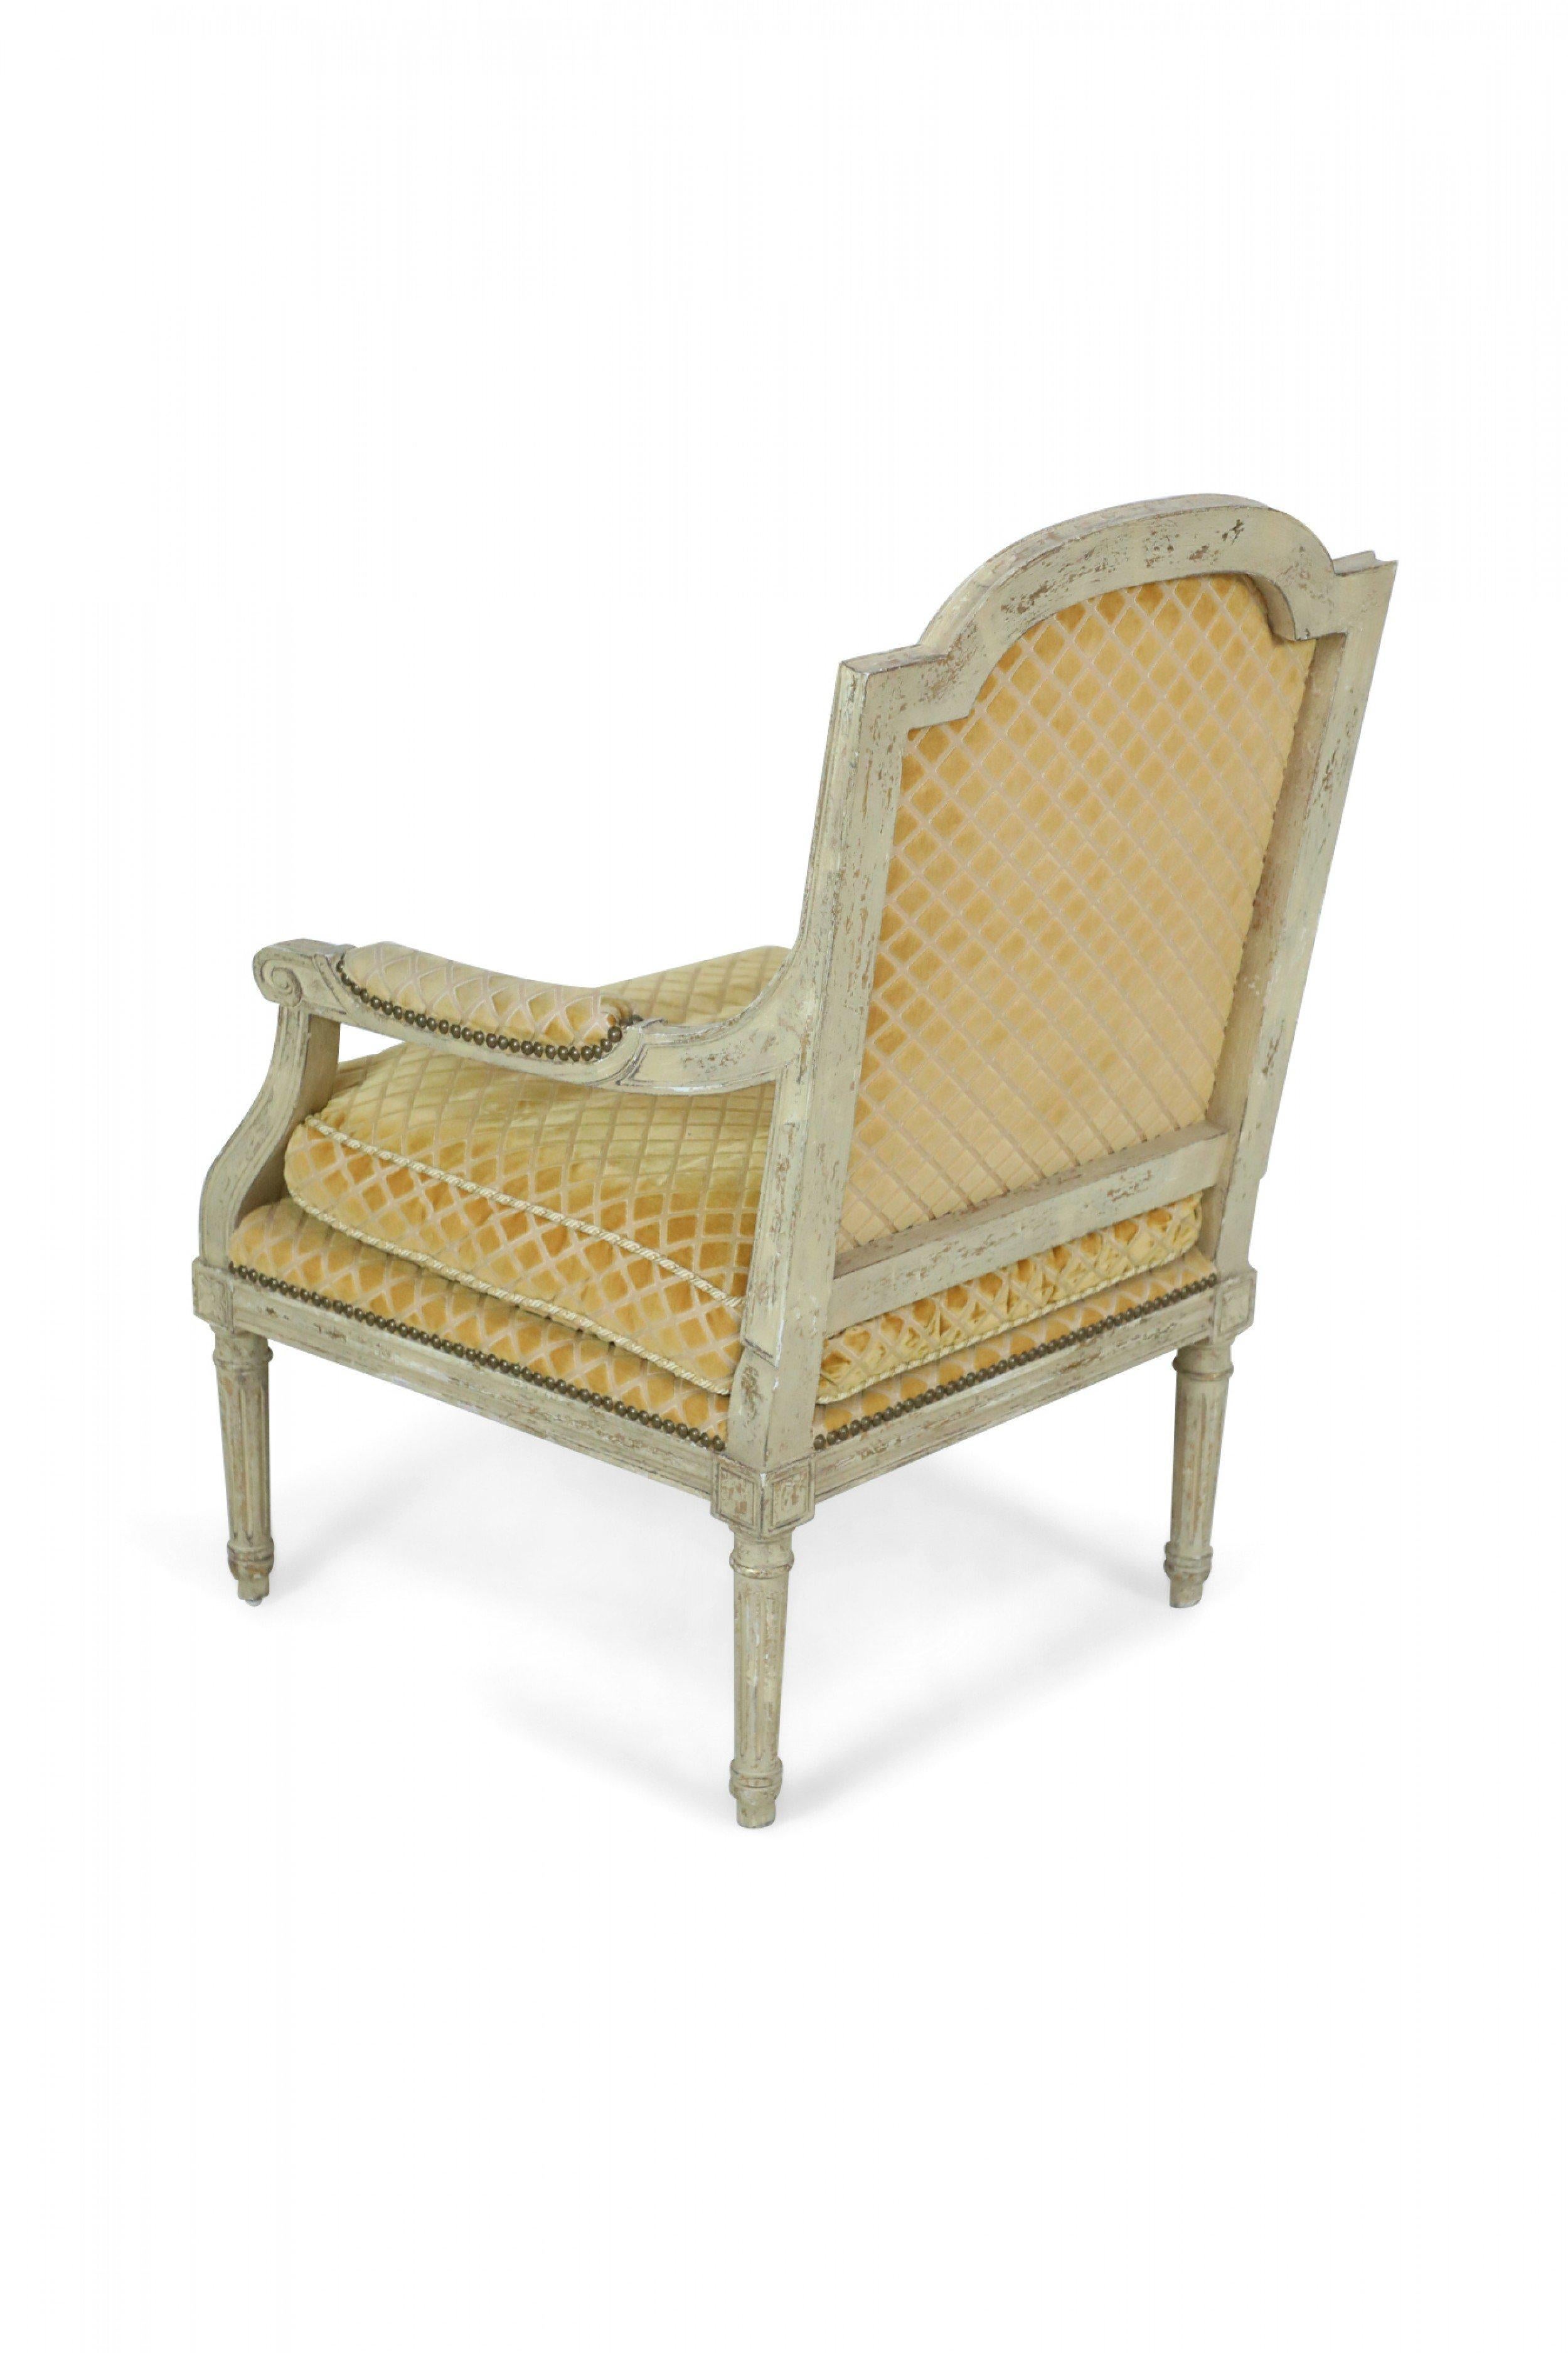 20th Century Pair of Louis XVI-Style Gold Upholstered Fauteuils / Armchairs For Sale